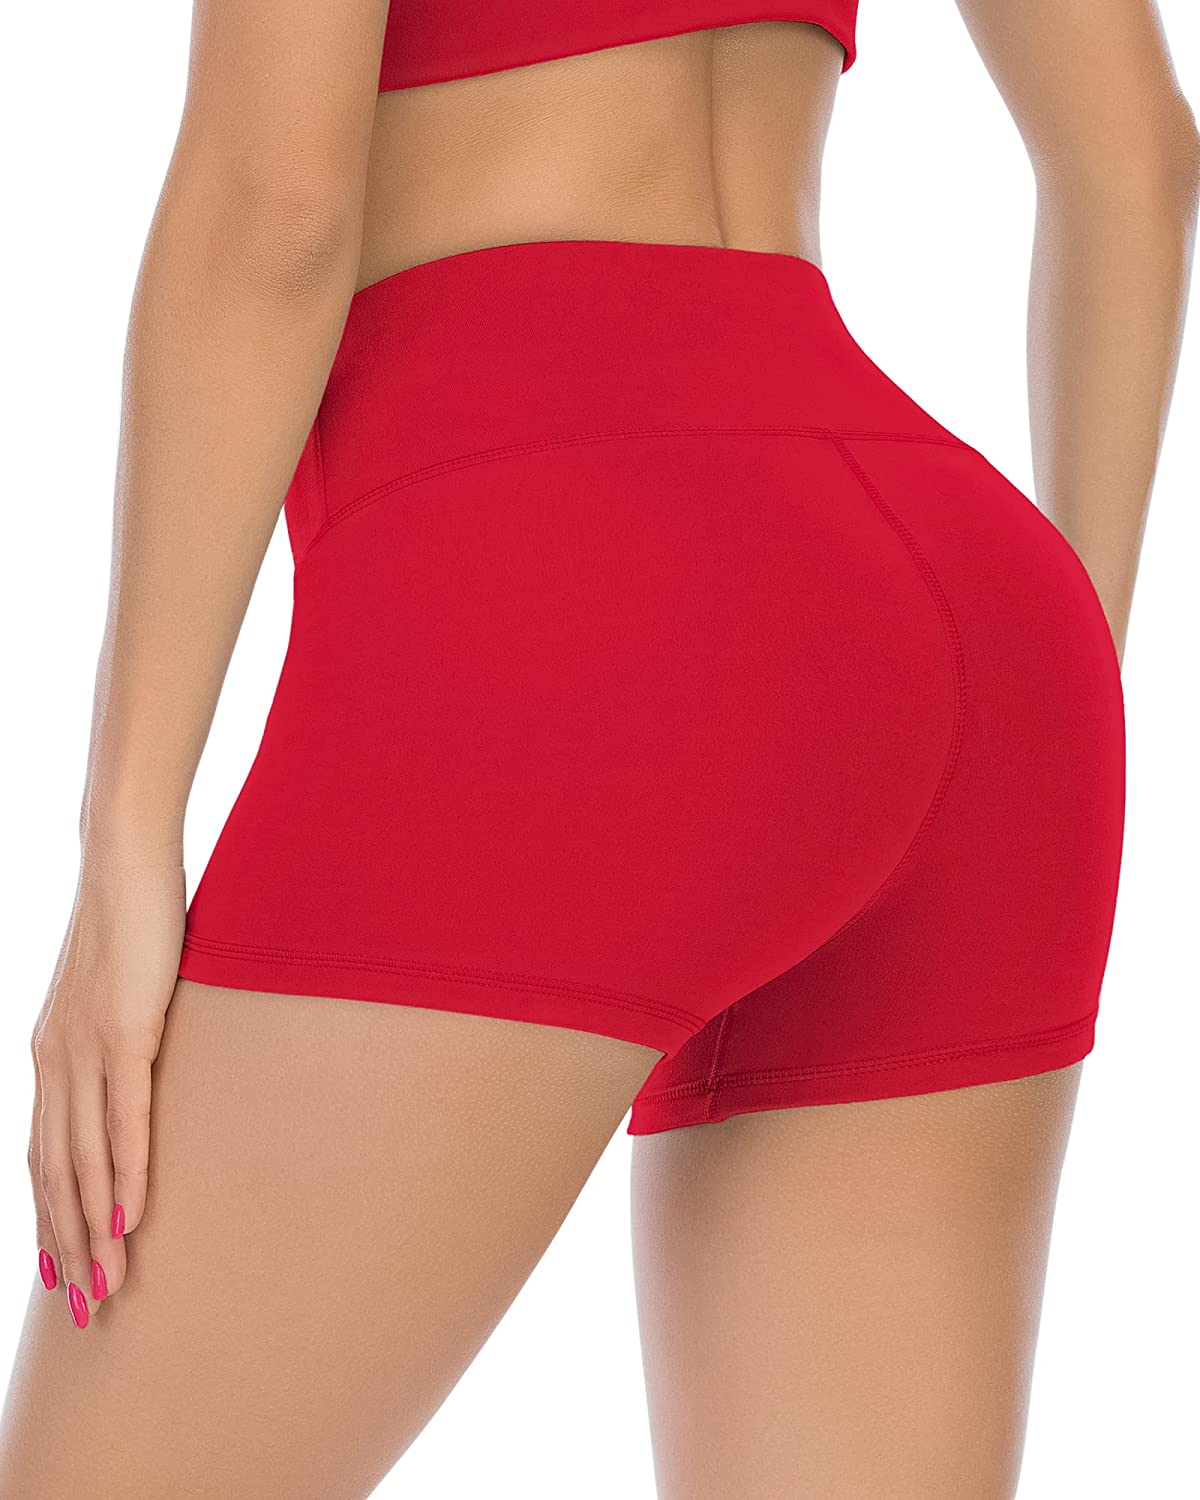 Workout Booty Spandex Shorts for Women, High Waist Soft Yoga